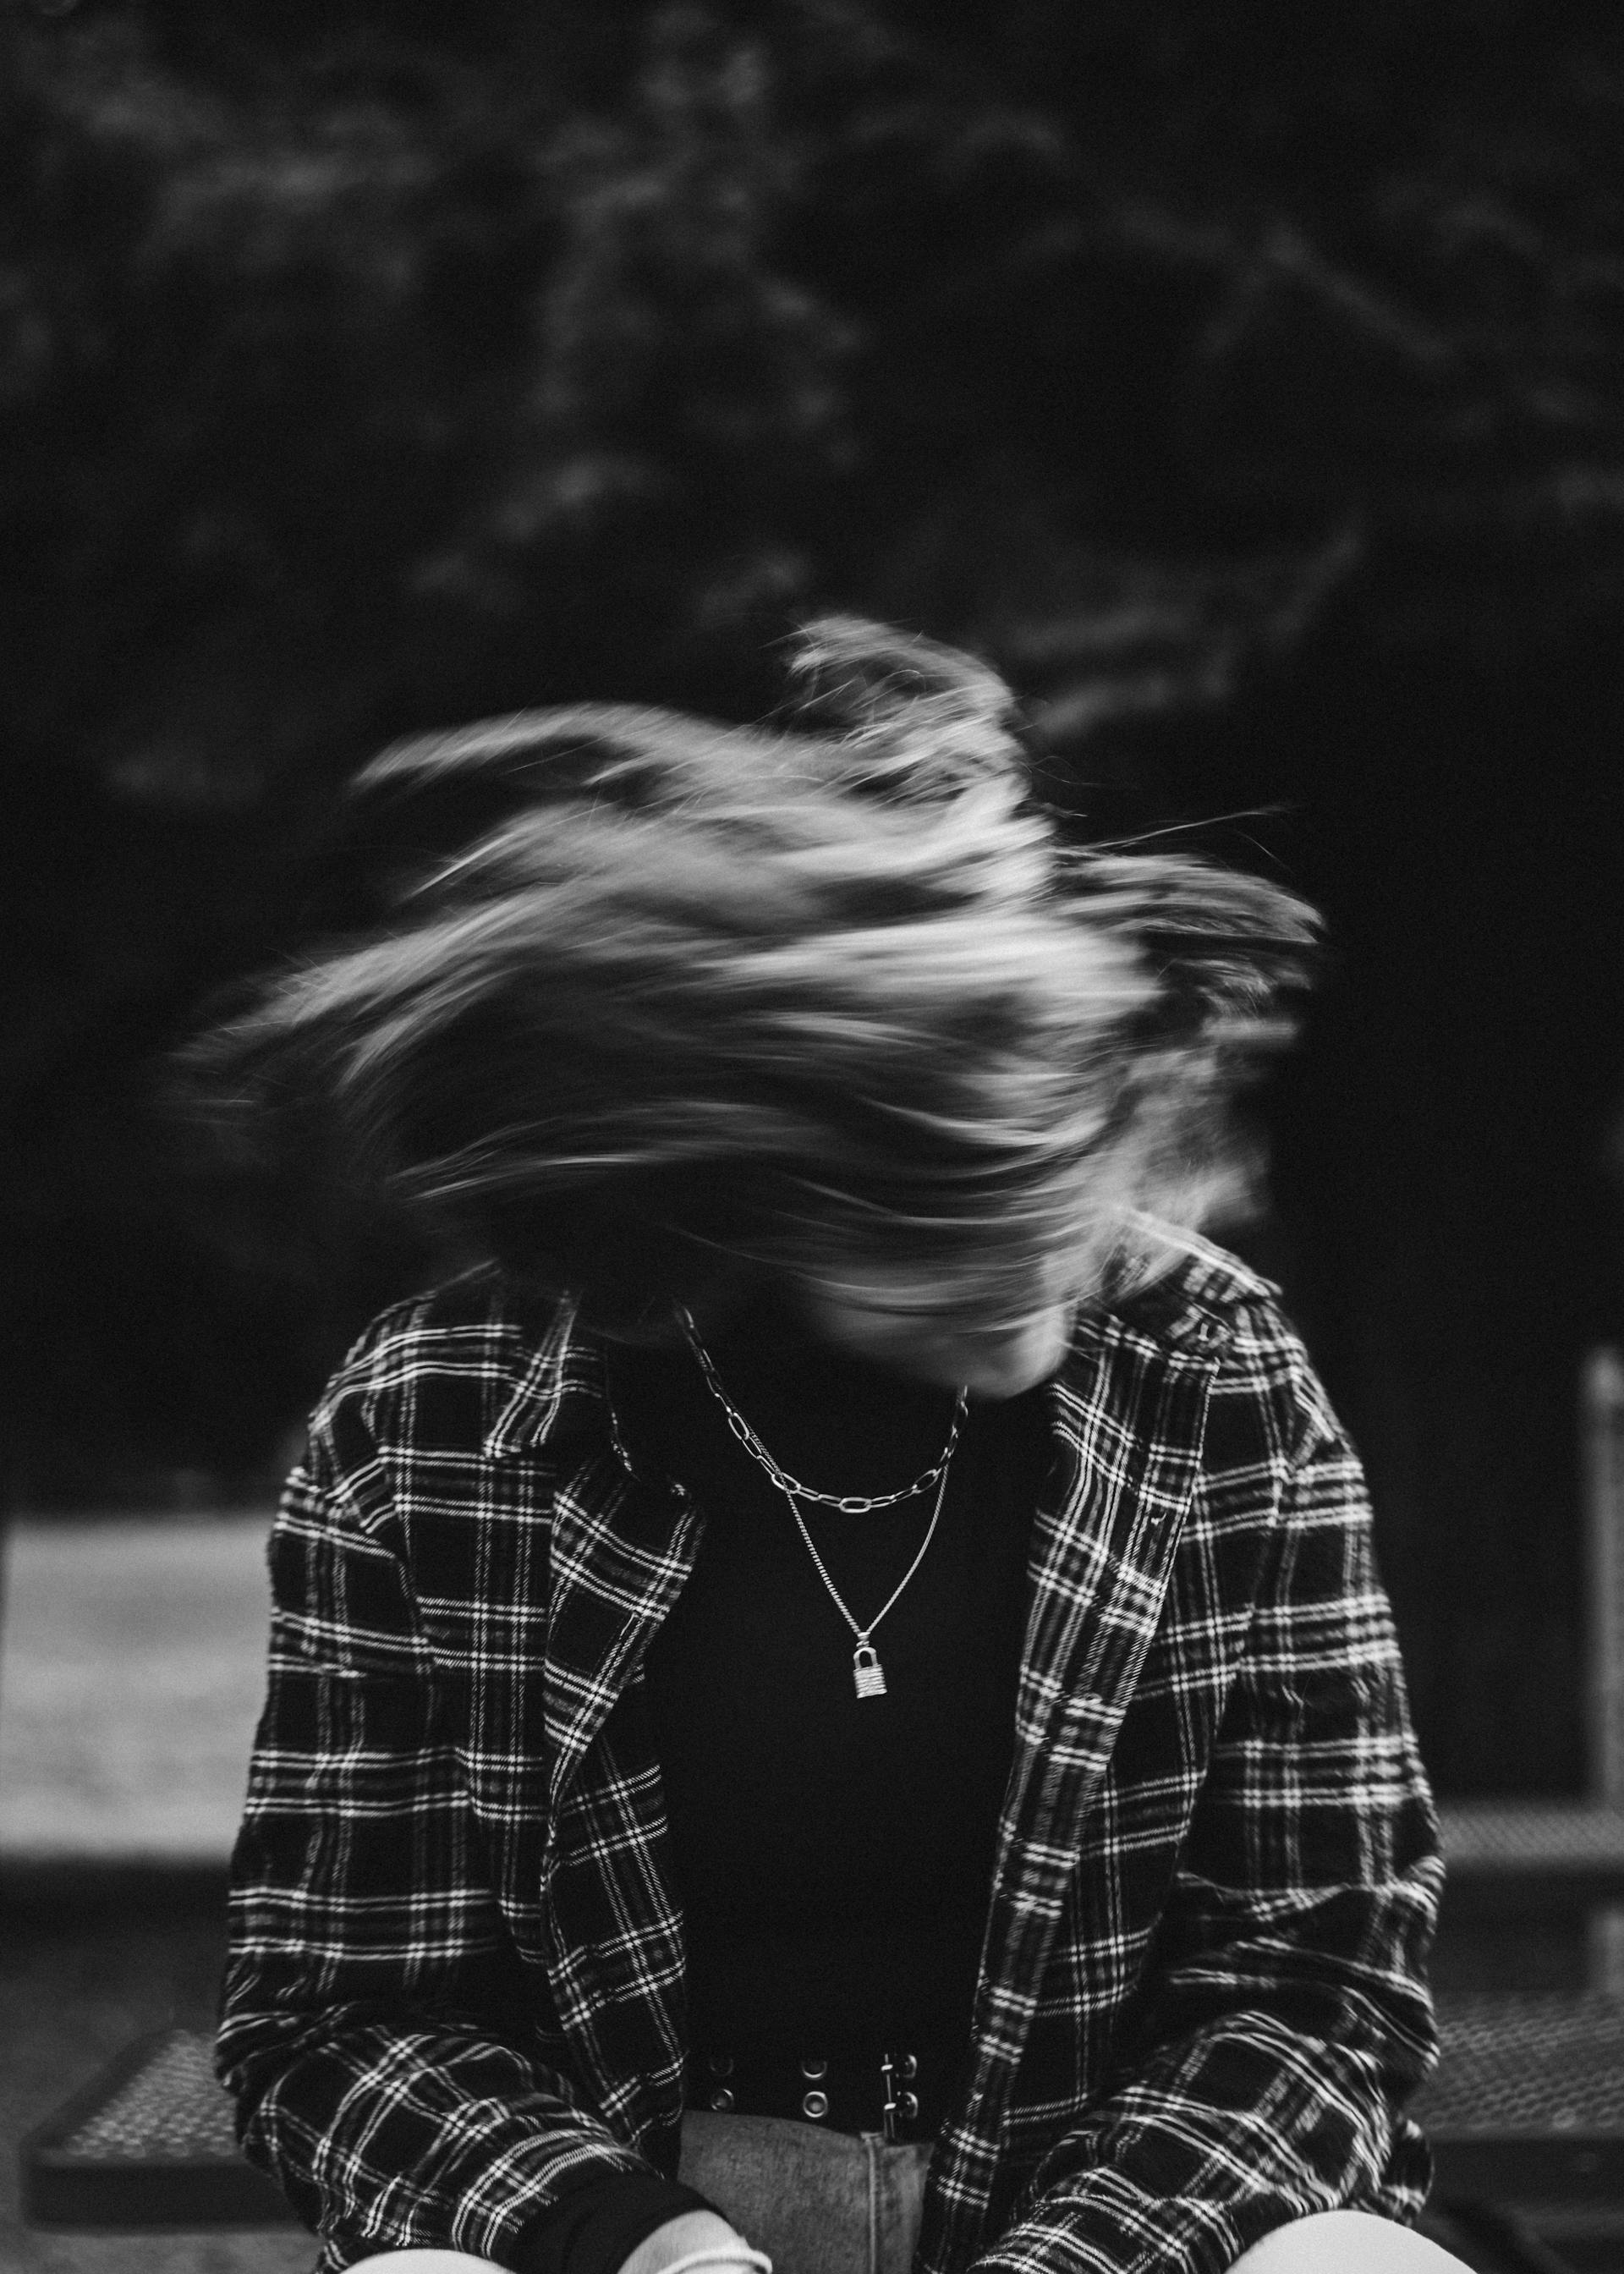 A person wearing flannel | Source: Pexels